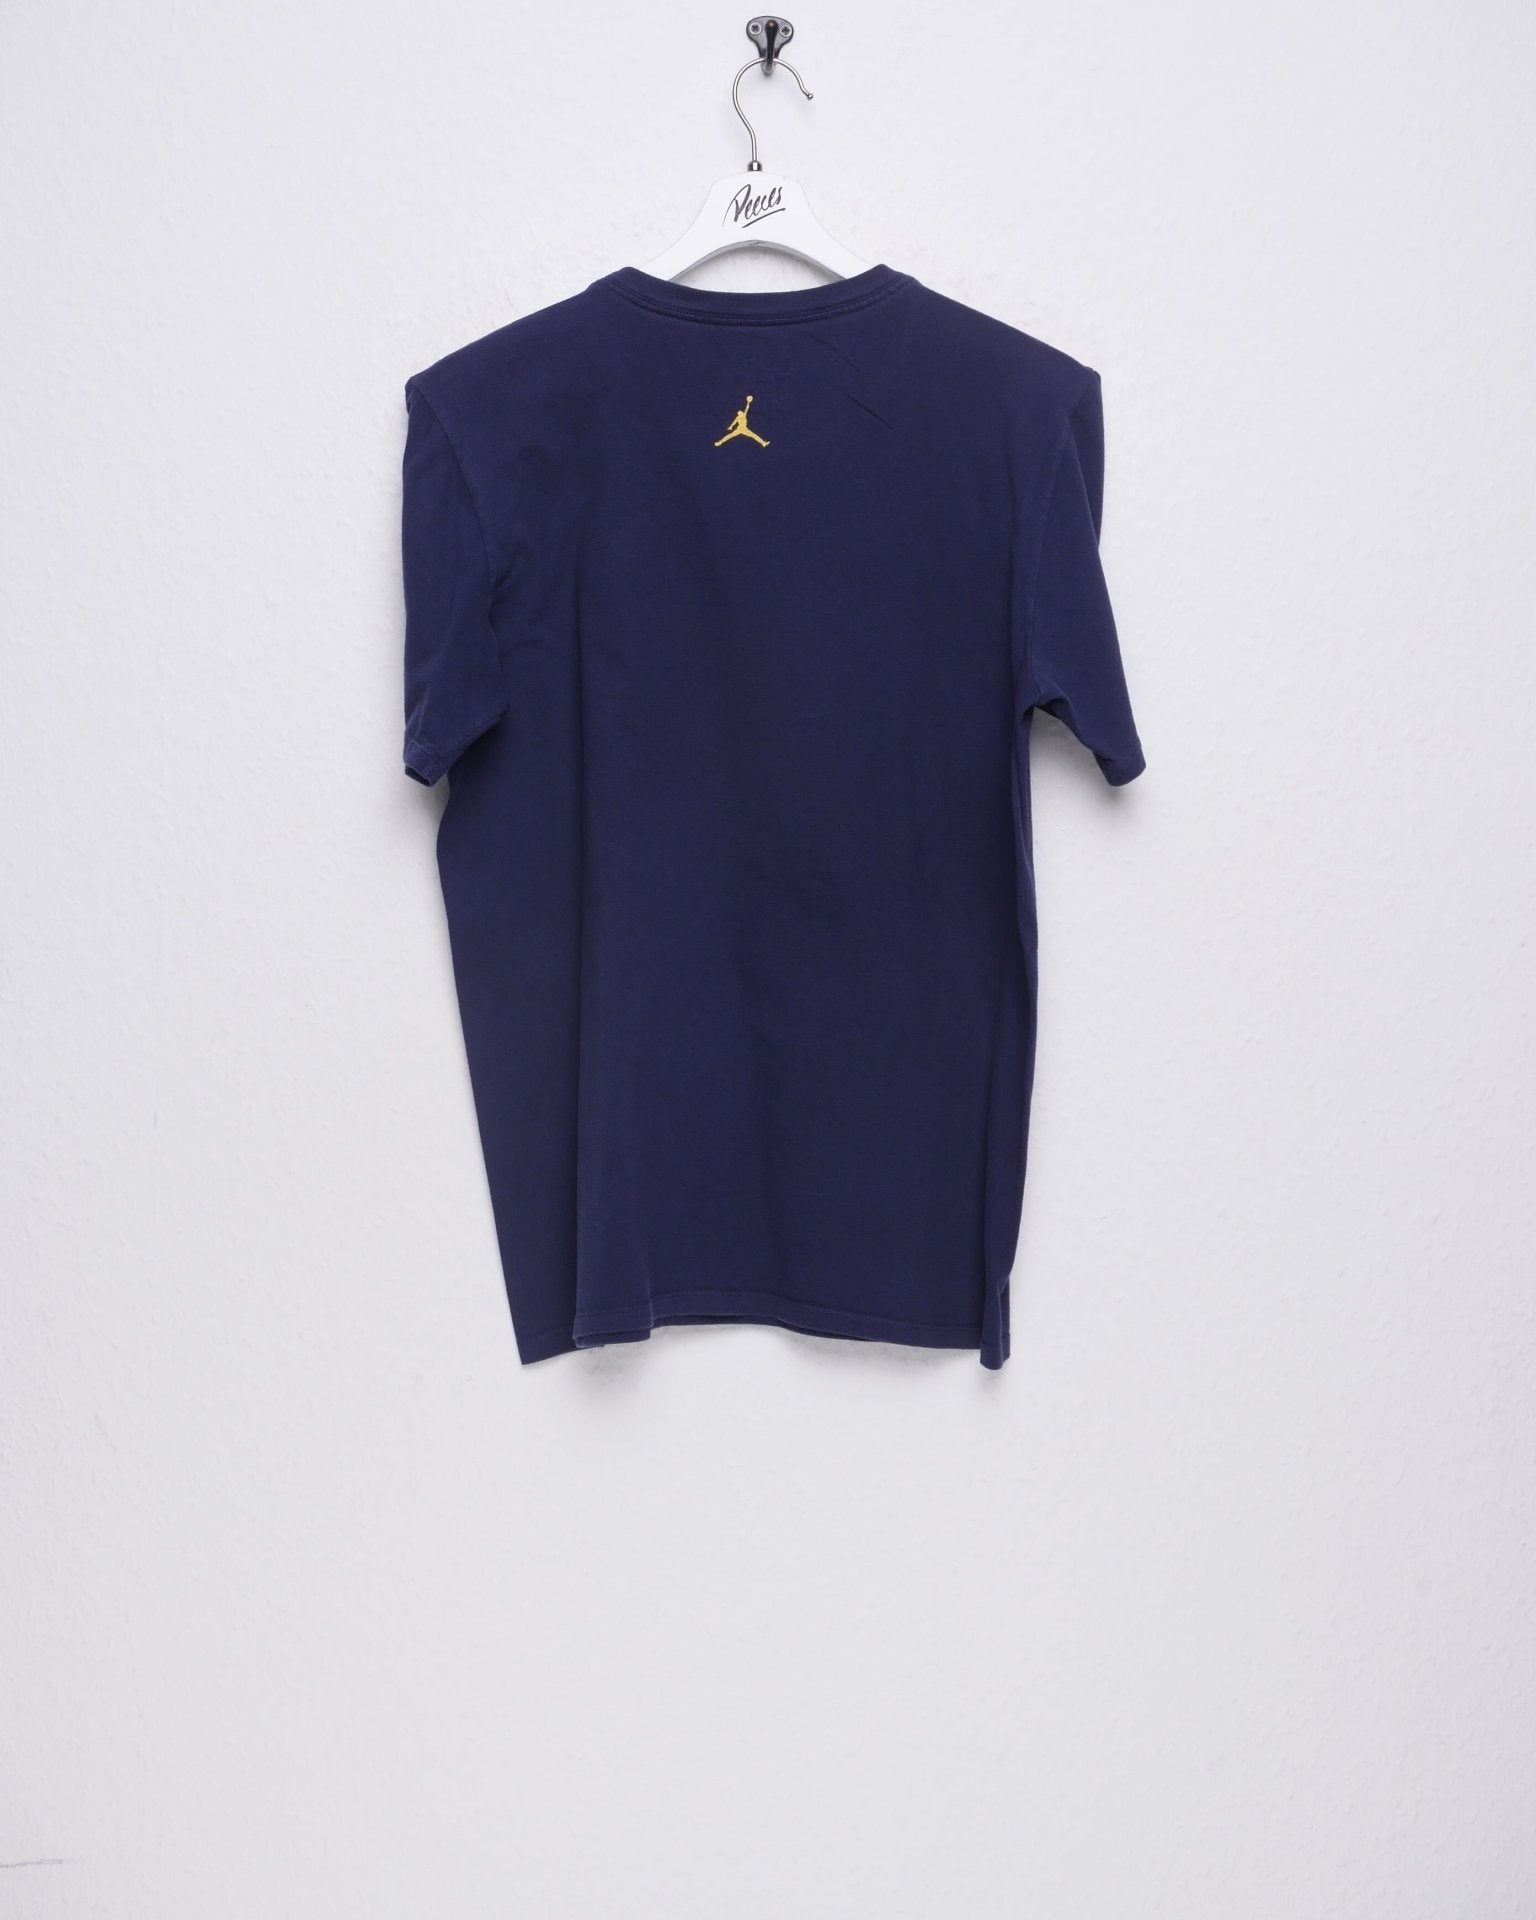 Nike printed Spellout Vintage Shirt - Peeces